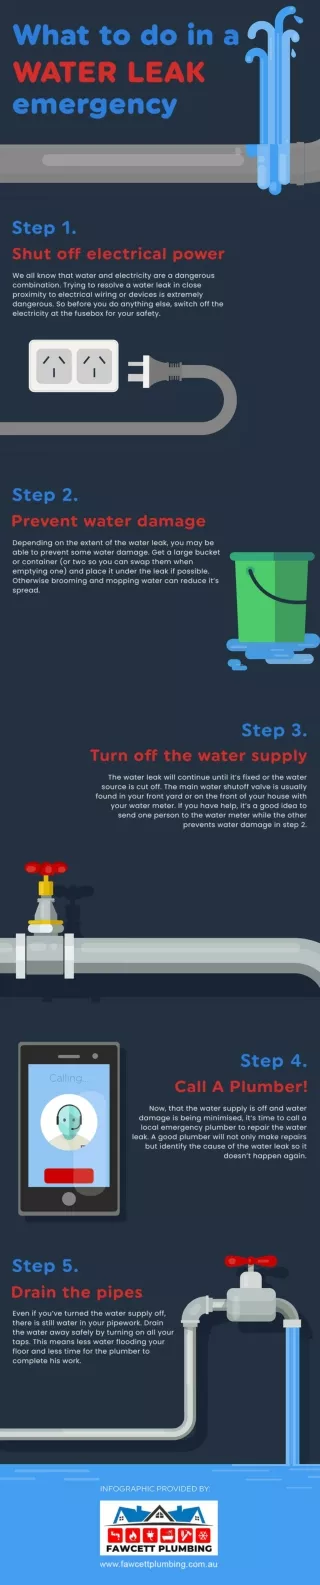 What To Do In A Water Leak Emergency?